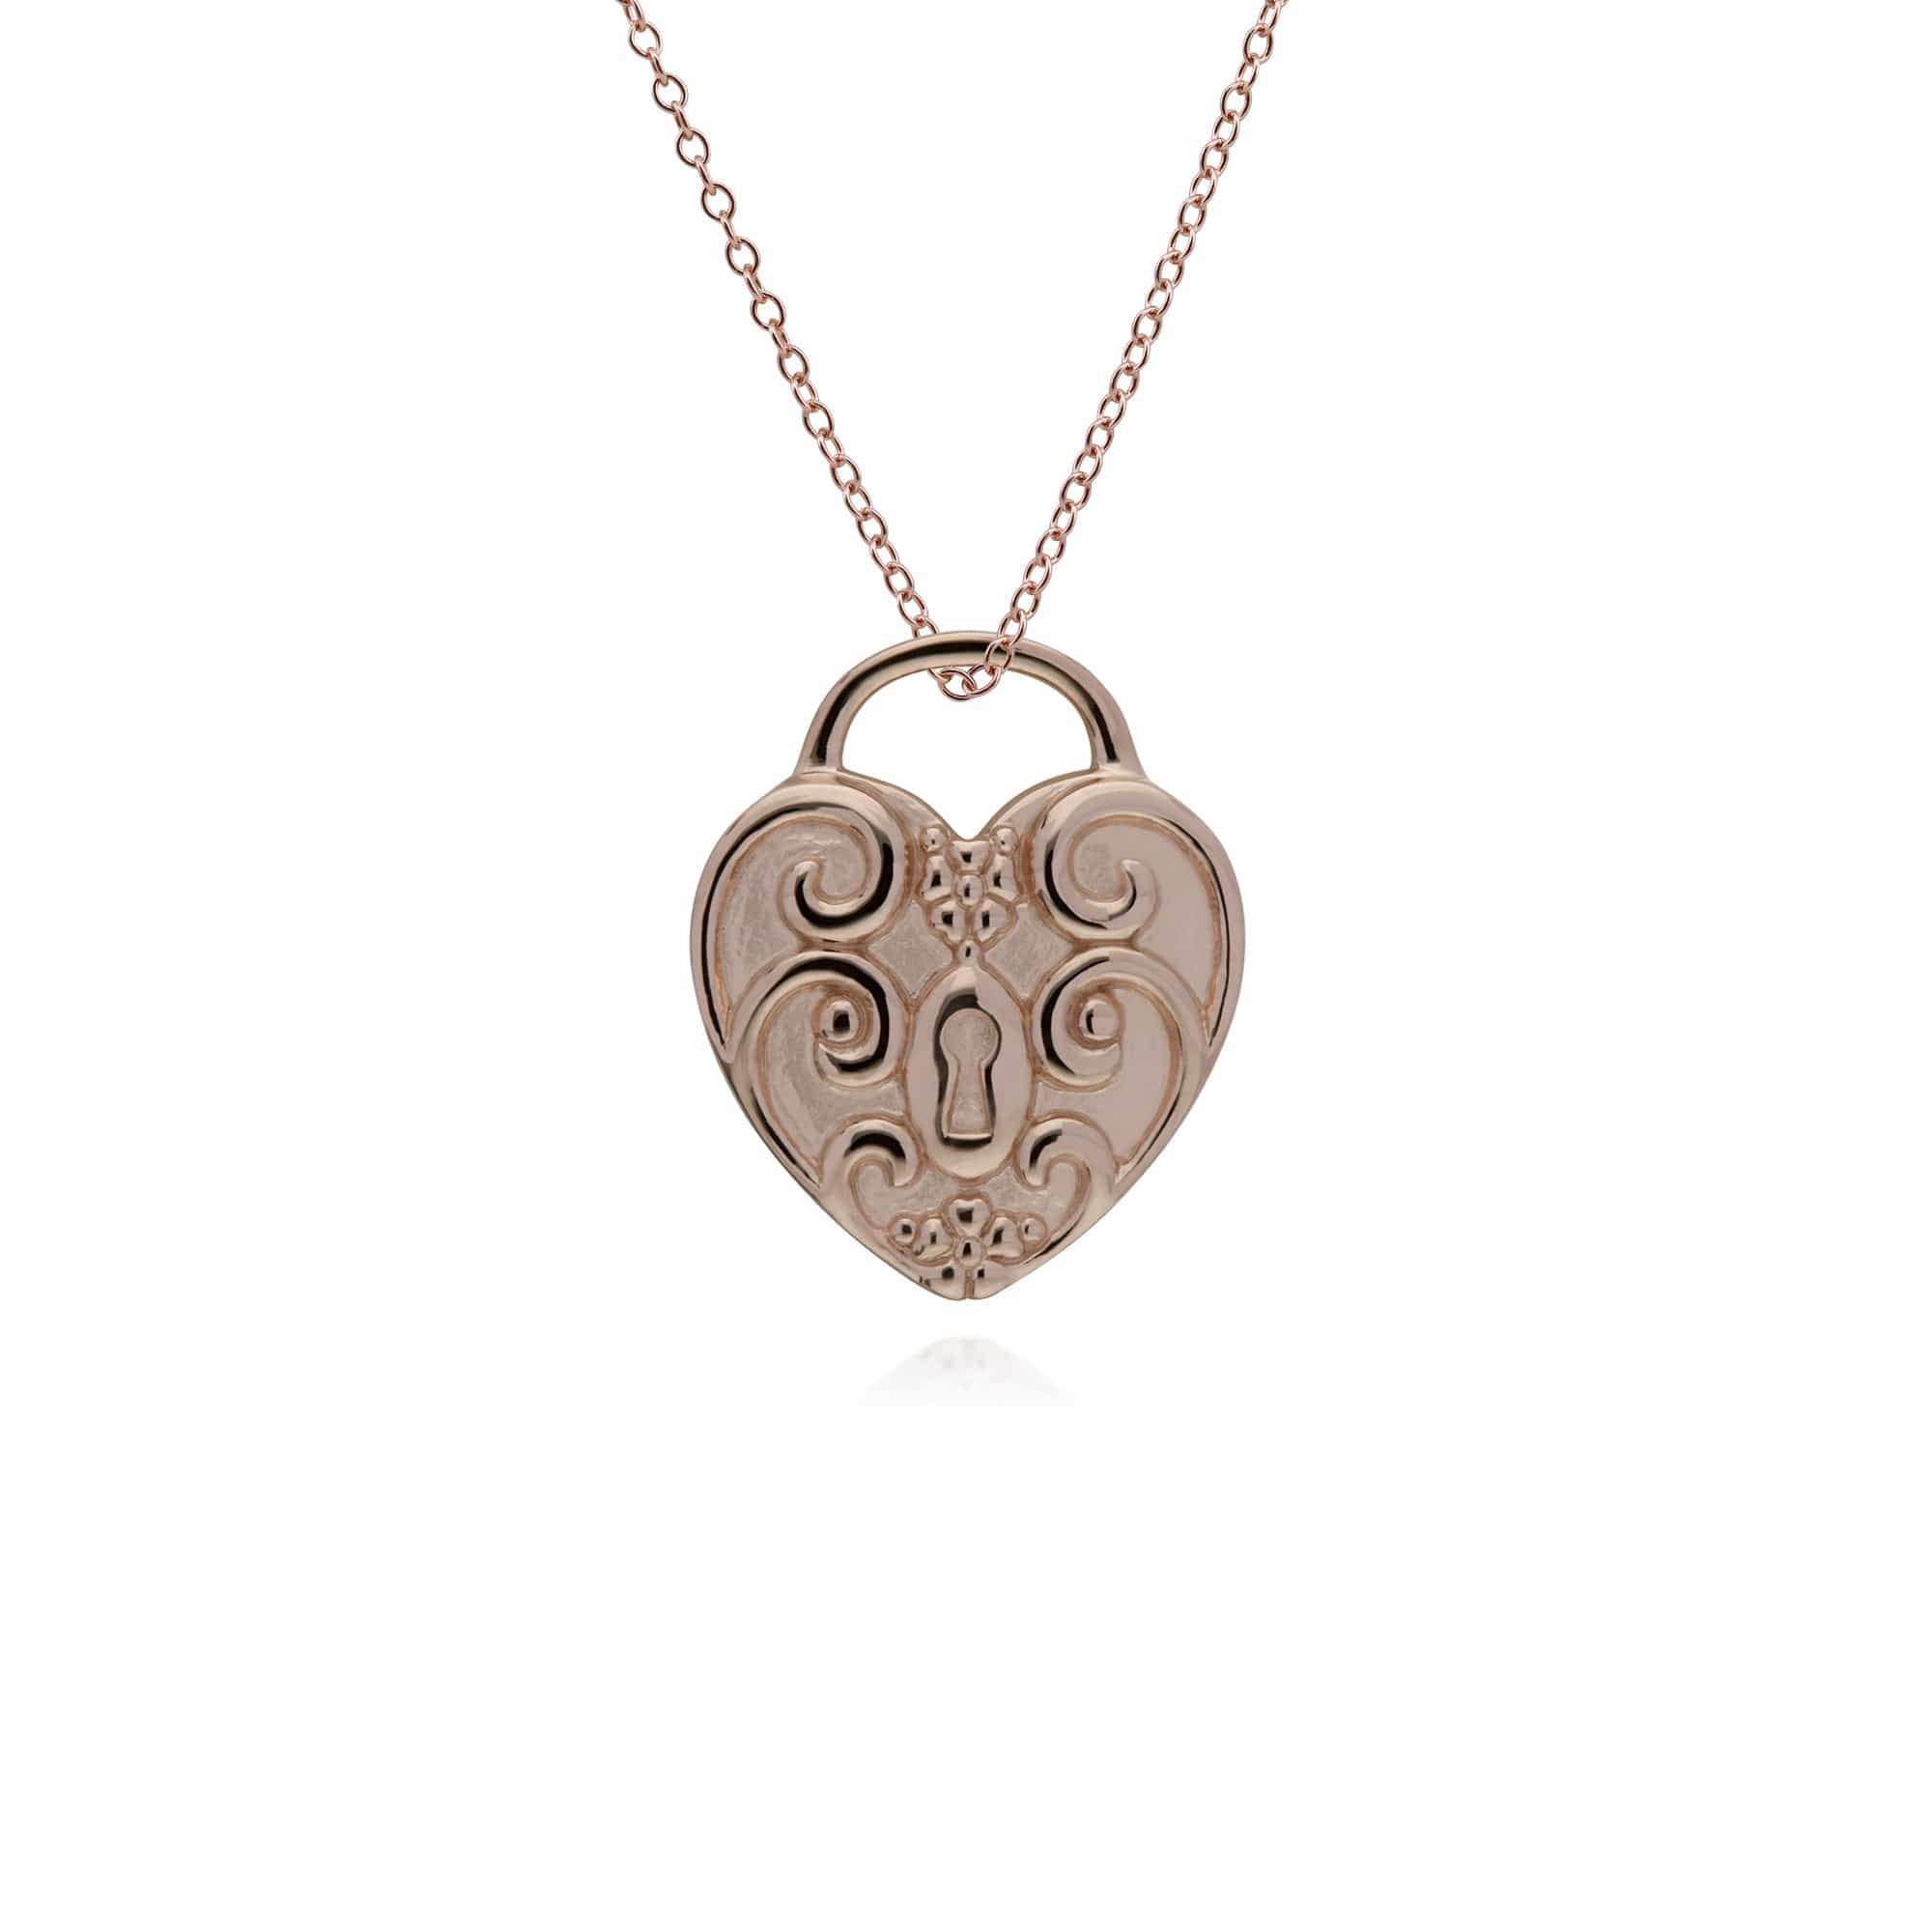 270P026307925-270P026501925 Classic Swirl Heart Lock Pendant & Peridot Key Charm in Rose Gold Plated 925 Sterling Silver 3